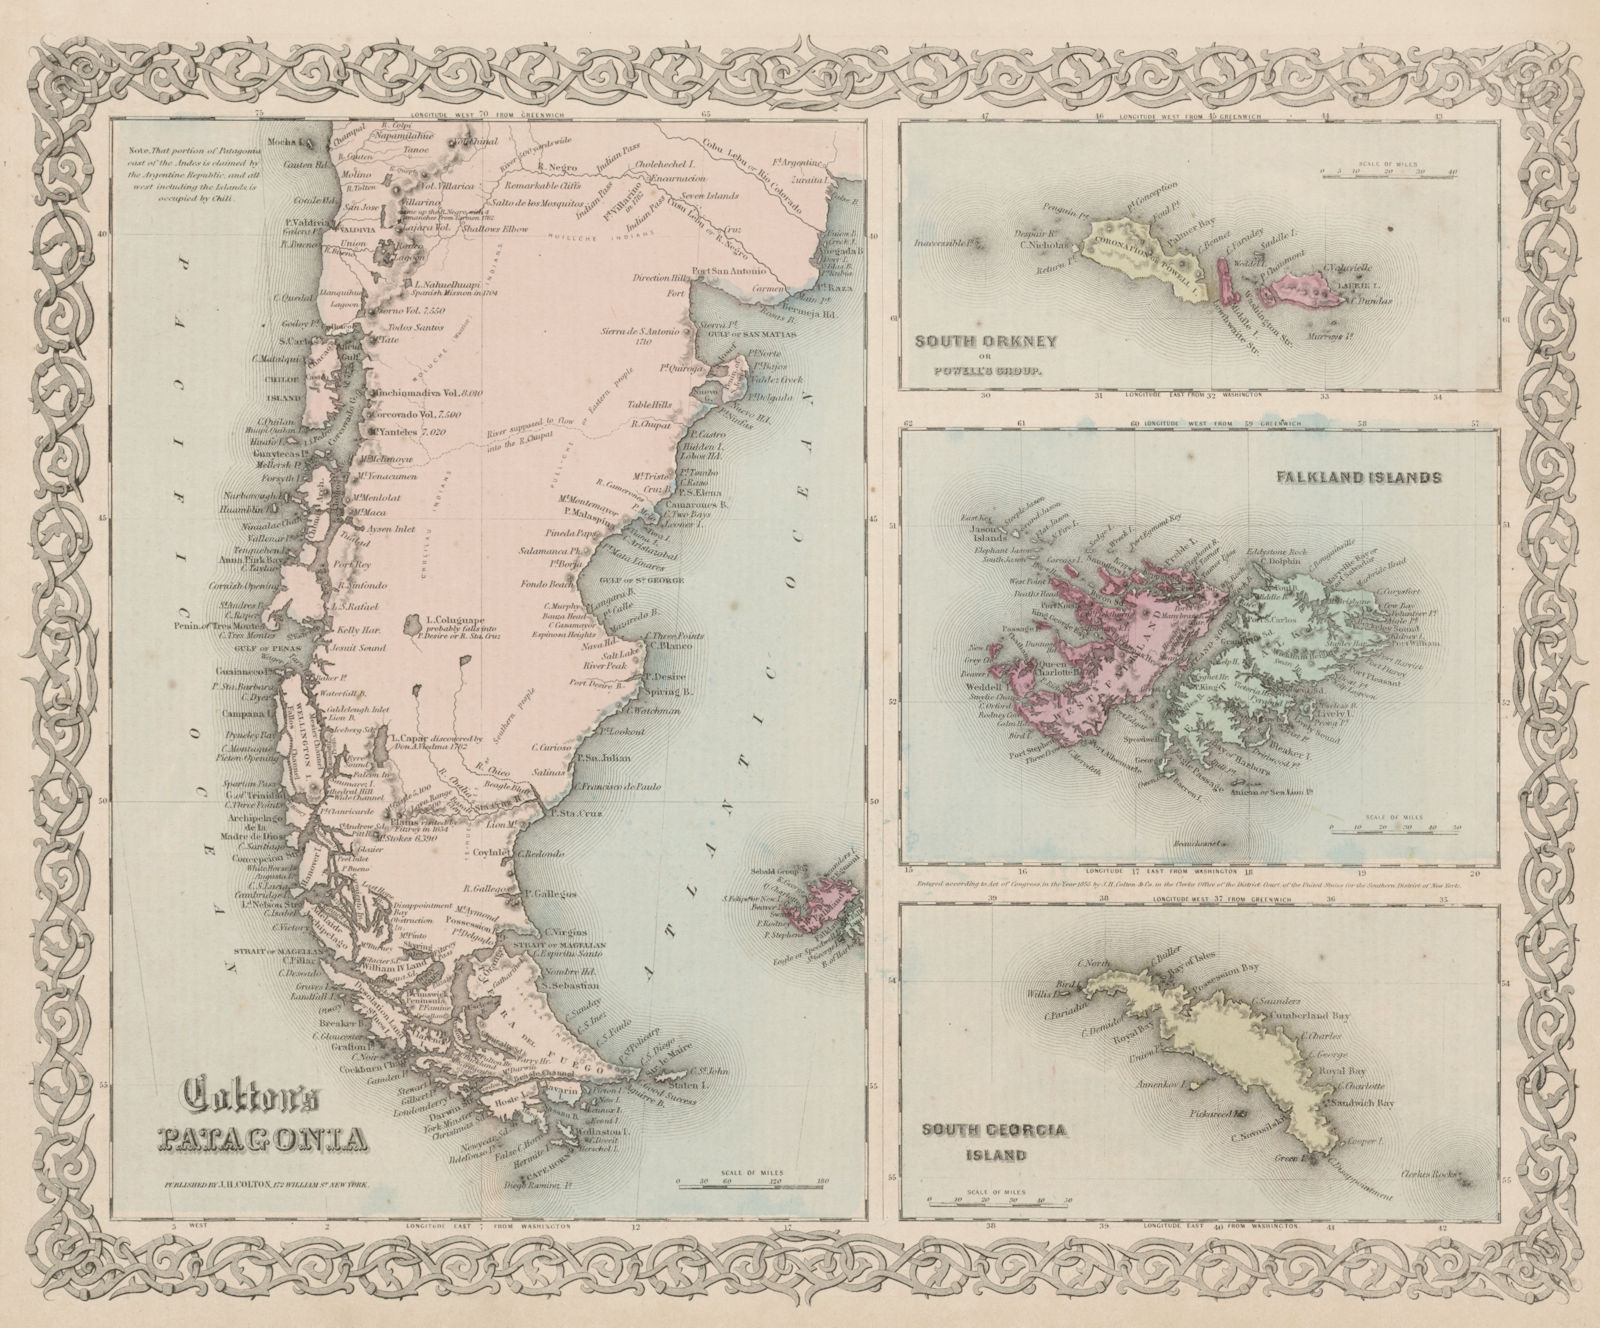 Colton's Patagonia, South Orkney, Falkland Islands & South Georgia 1863 map